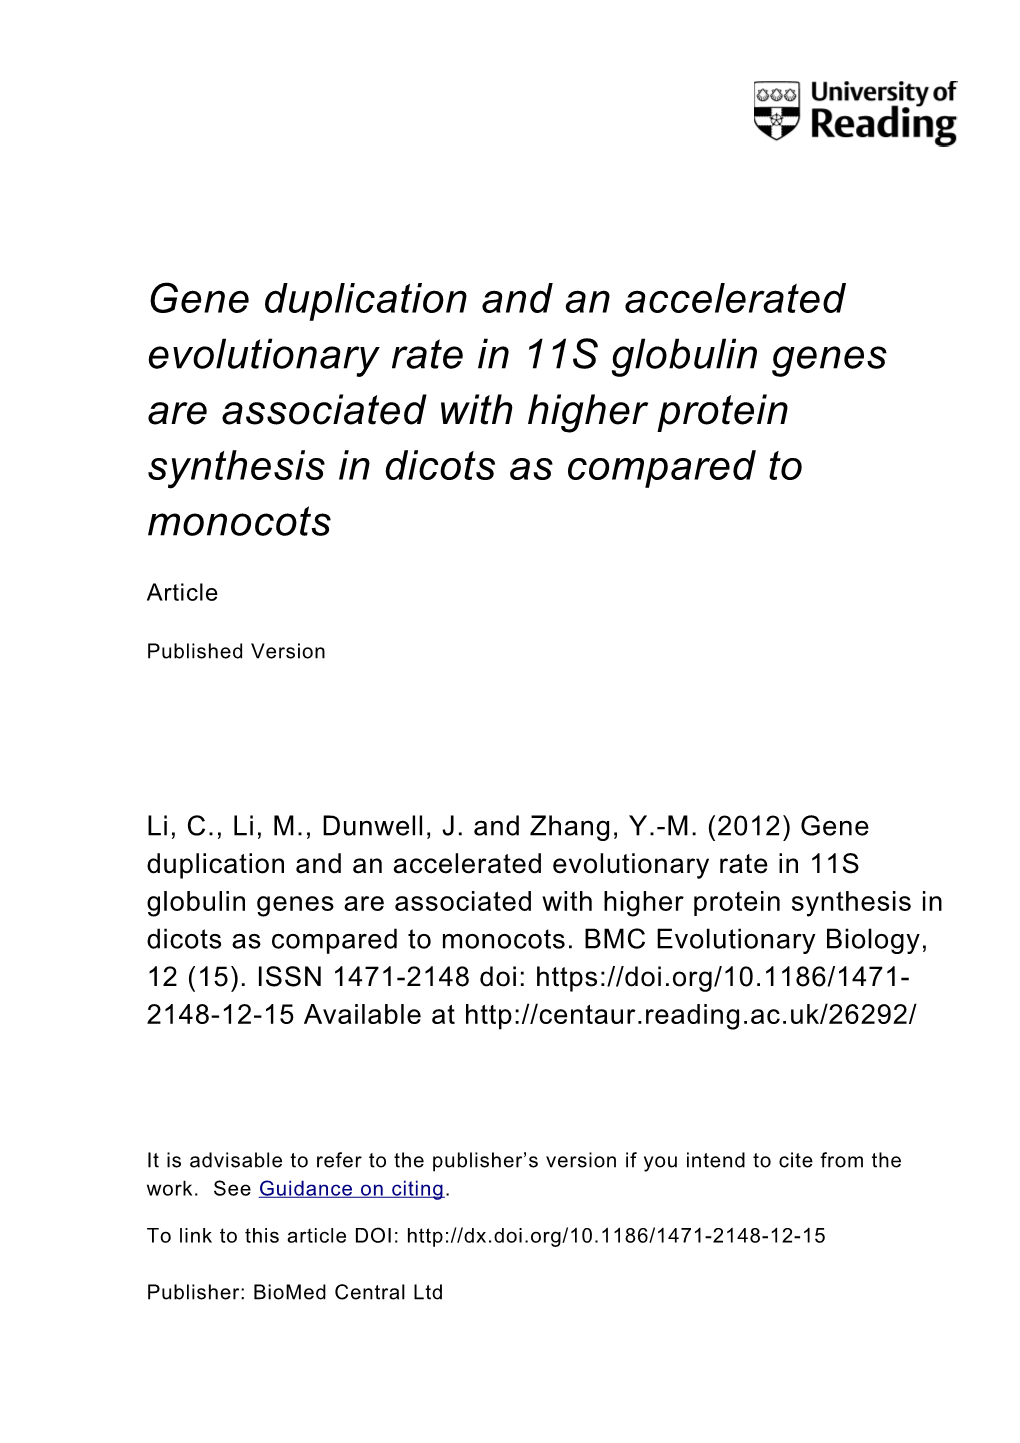 Gene Duplication and an Accelerated Evolutionary Rate in 11S Globulin Genes Are Associated with Higher Protein Synthesis in Dicots As Compared to Monocots